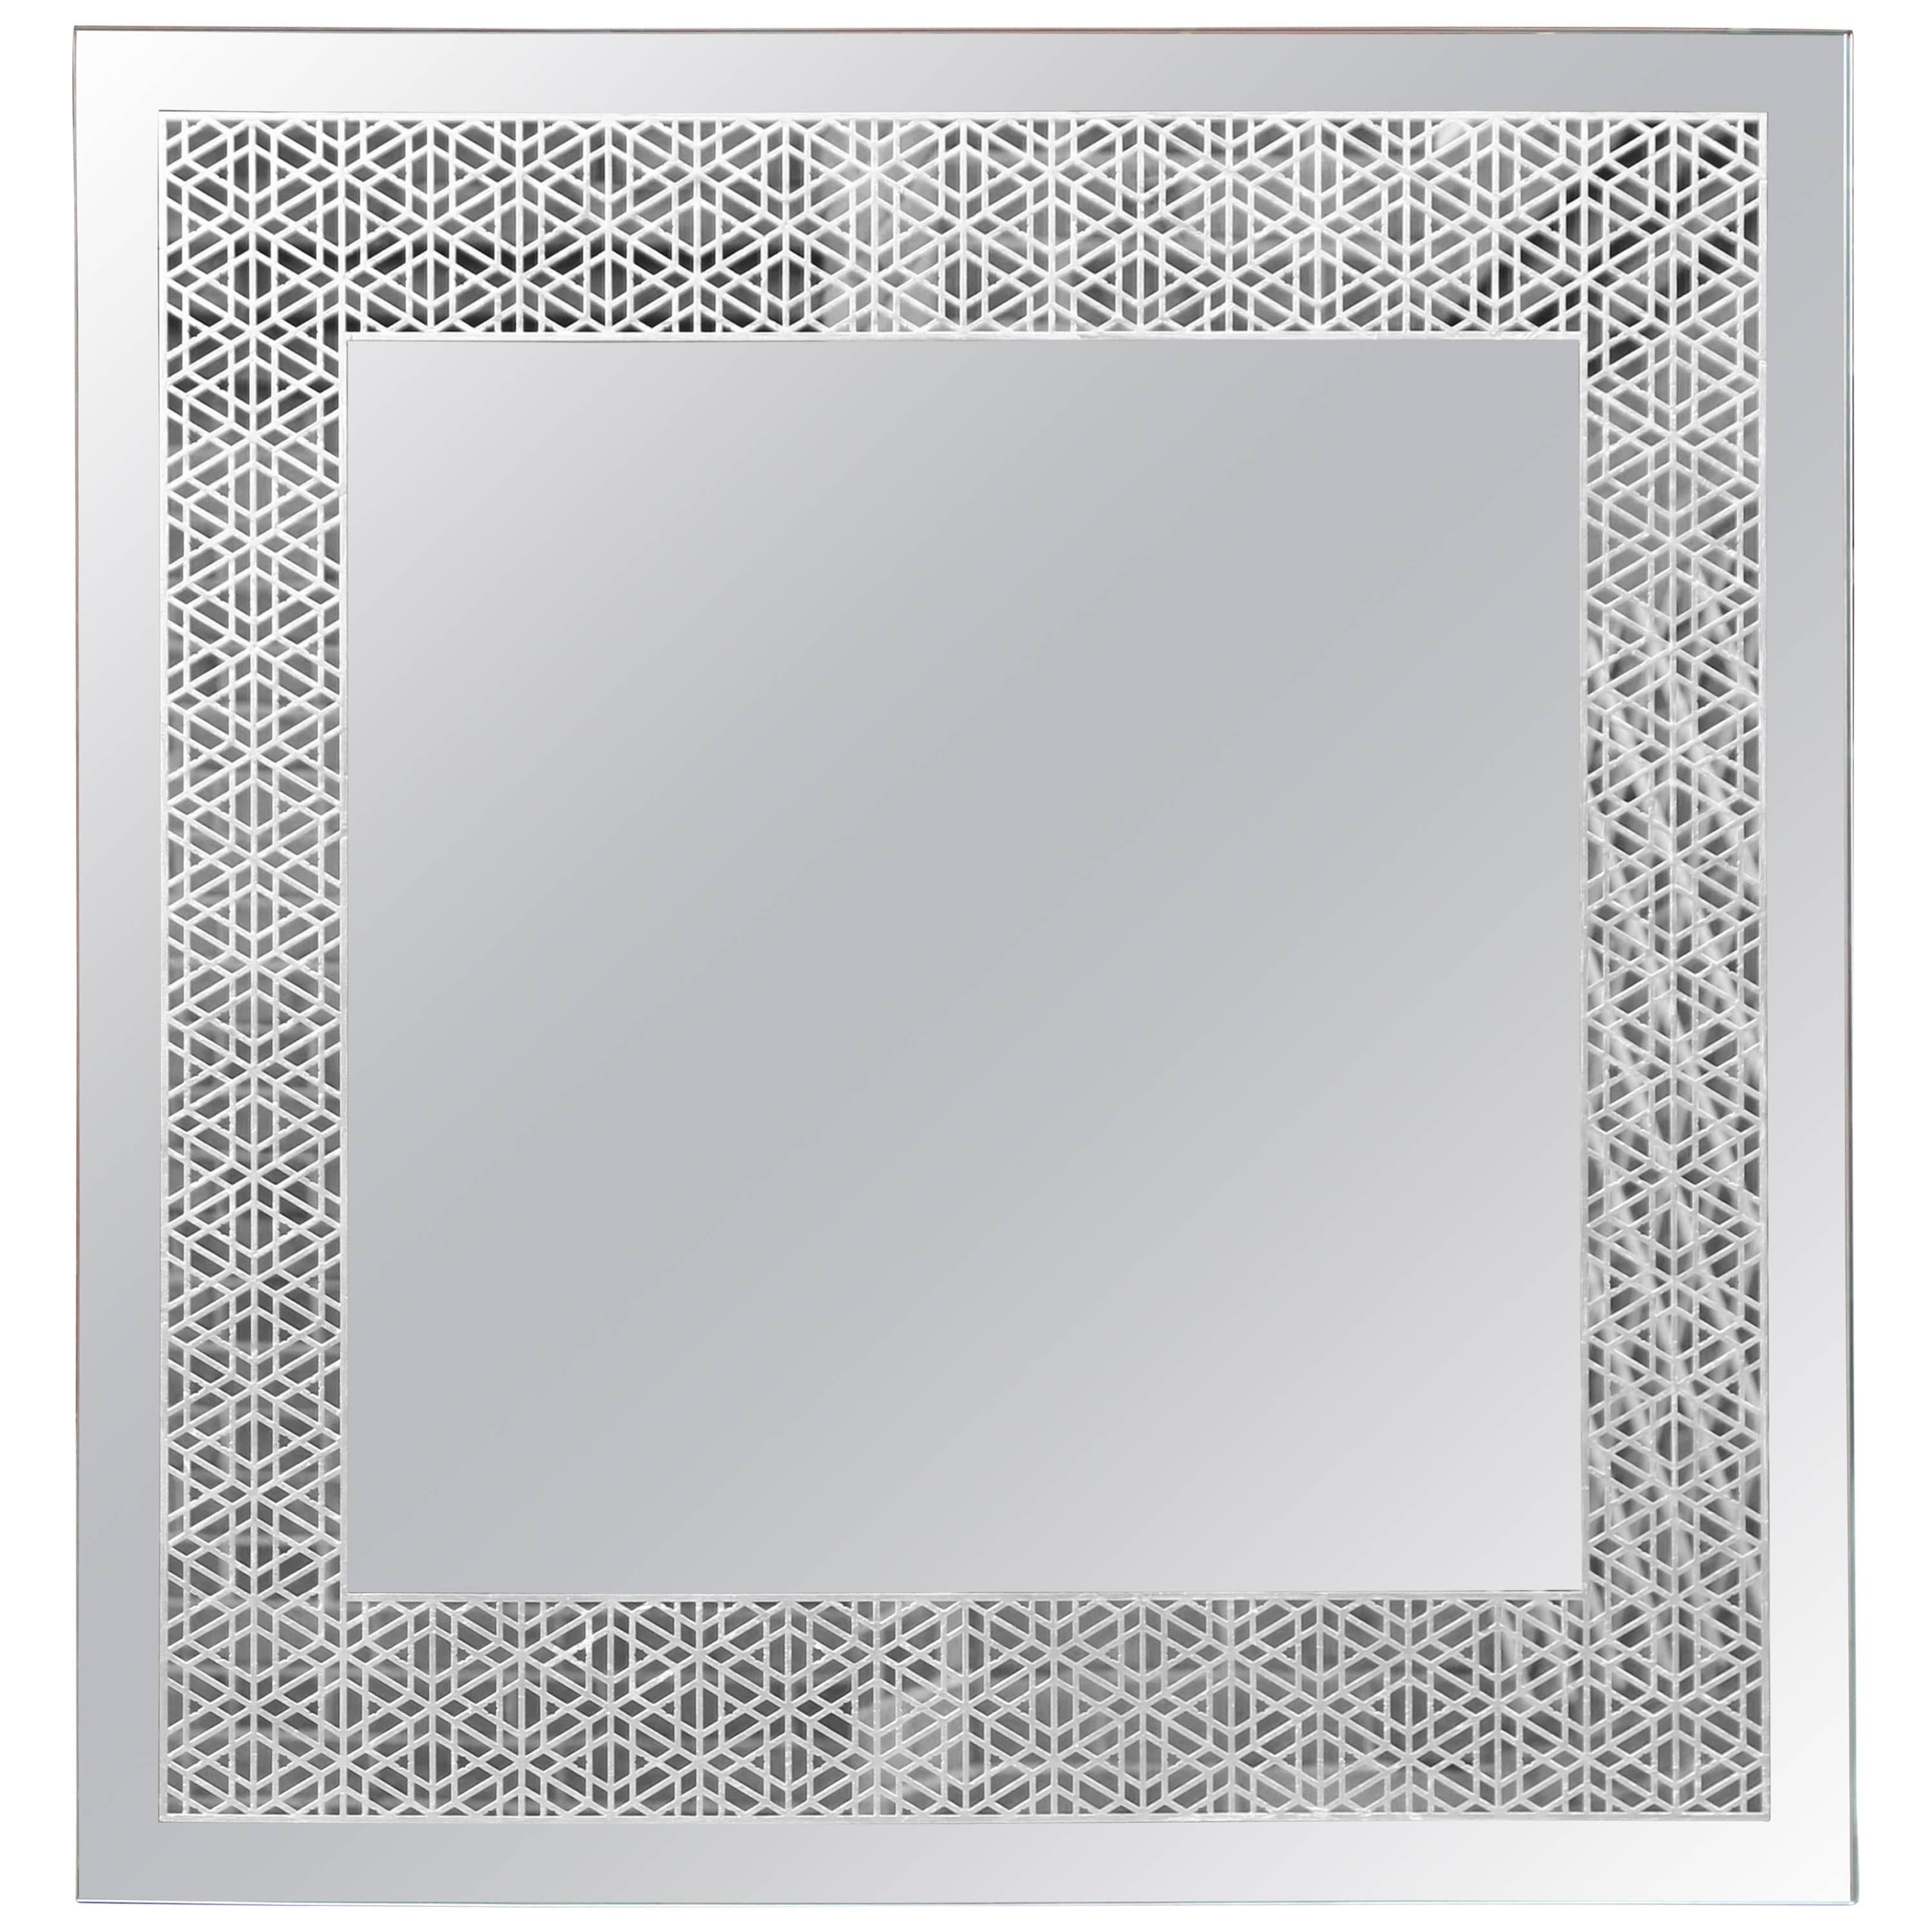 Our Granada Mirror adorns a refined pattern inspired by Spanish Arabic designs that is expertly etched onto its back and delicately hand gilded with silver leafs.

Commonly associated with prosperity and prestige, silver is also glamorous and